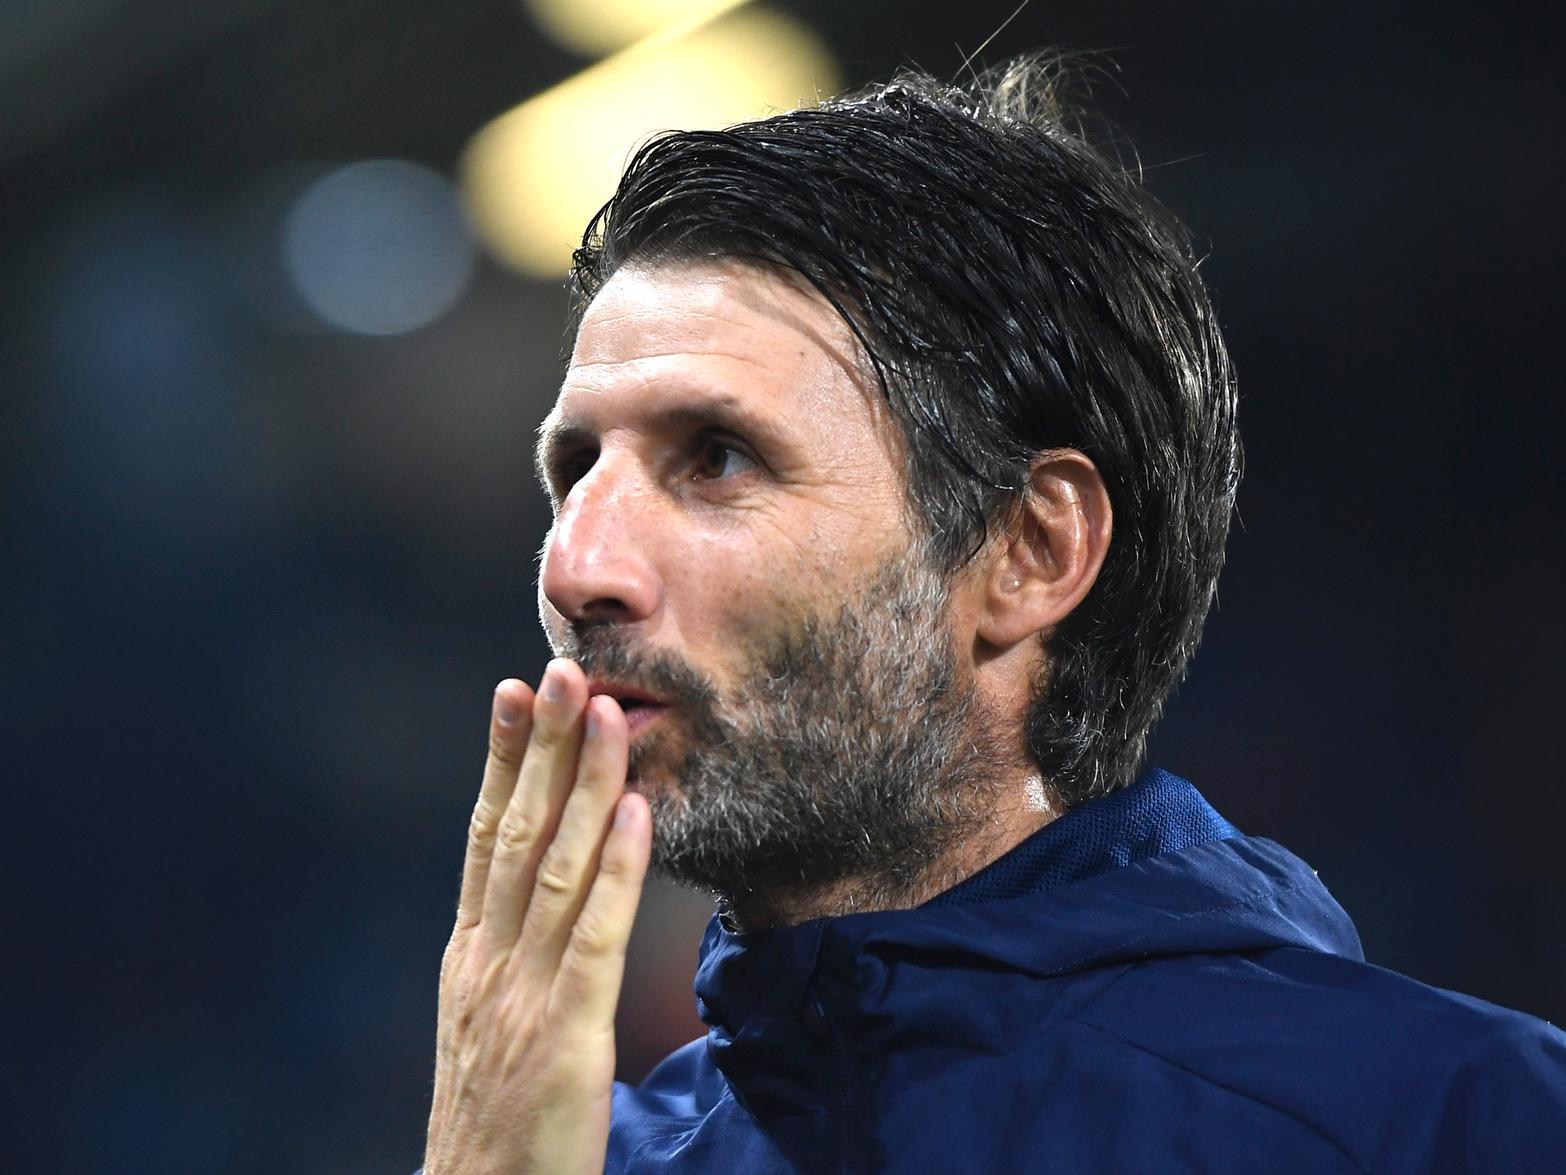 Huddersfield Town's head of football operations has revealed that the club could well part company with a number of first team players in January, as Danny Cowley looks to shape his own squad. (Huddersfield Examiner)